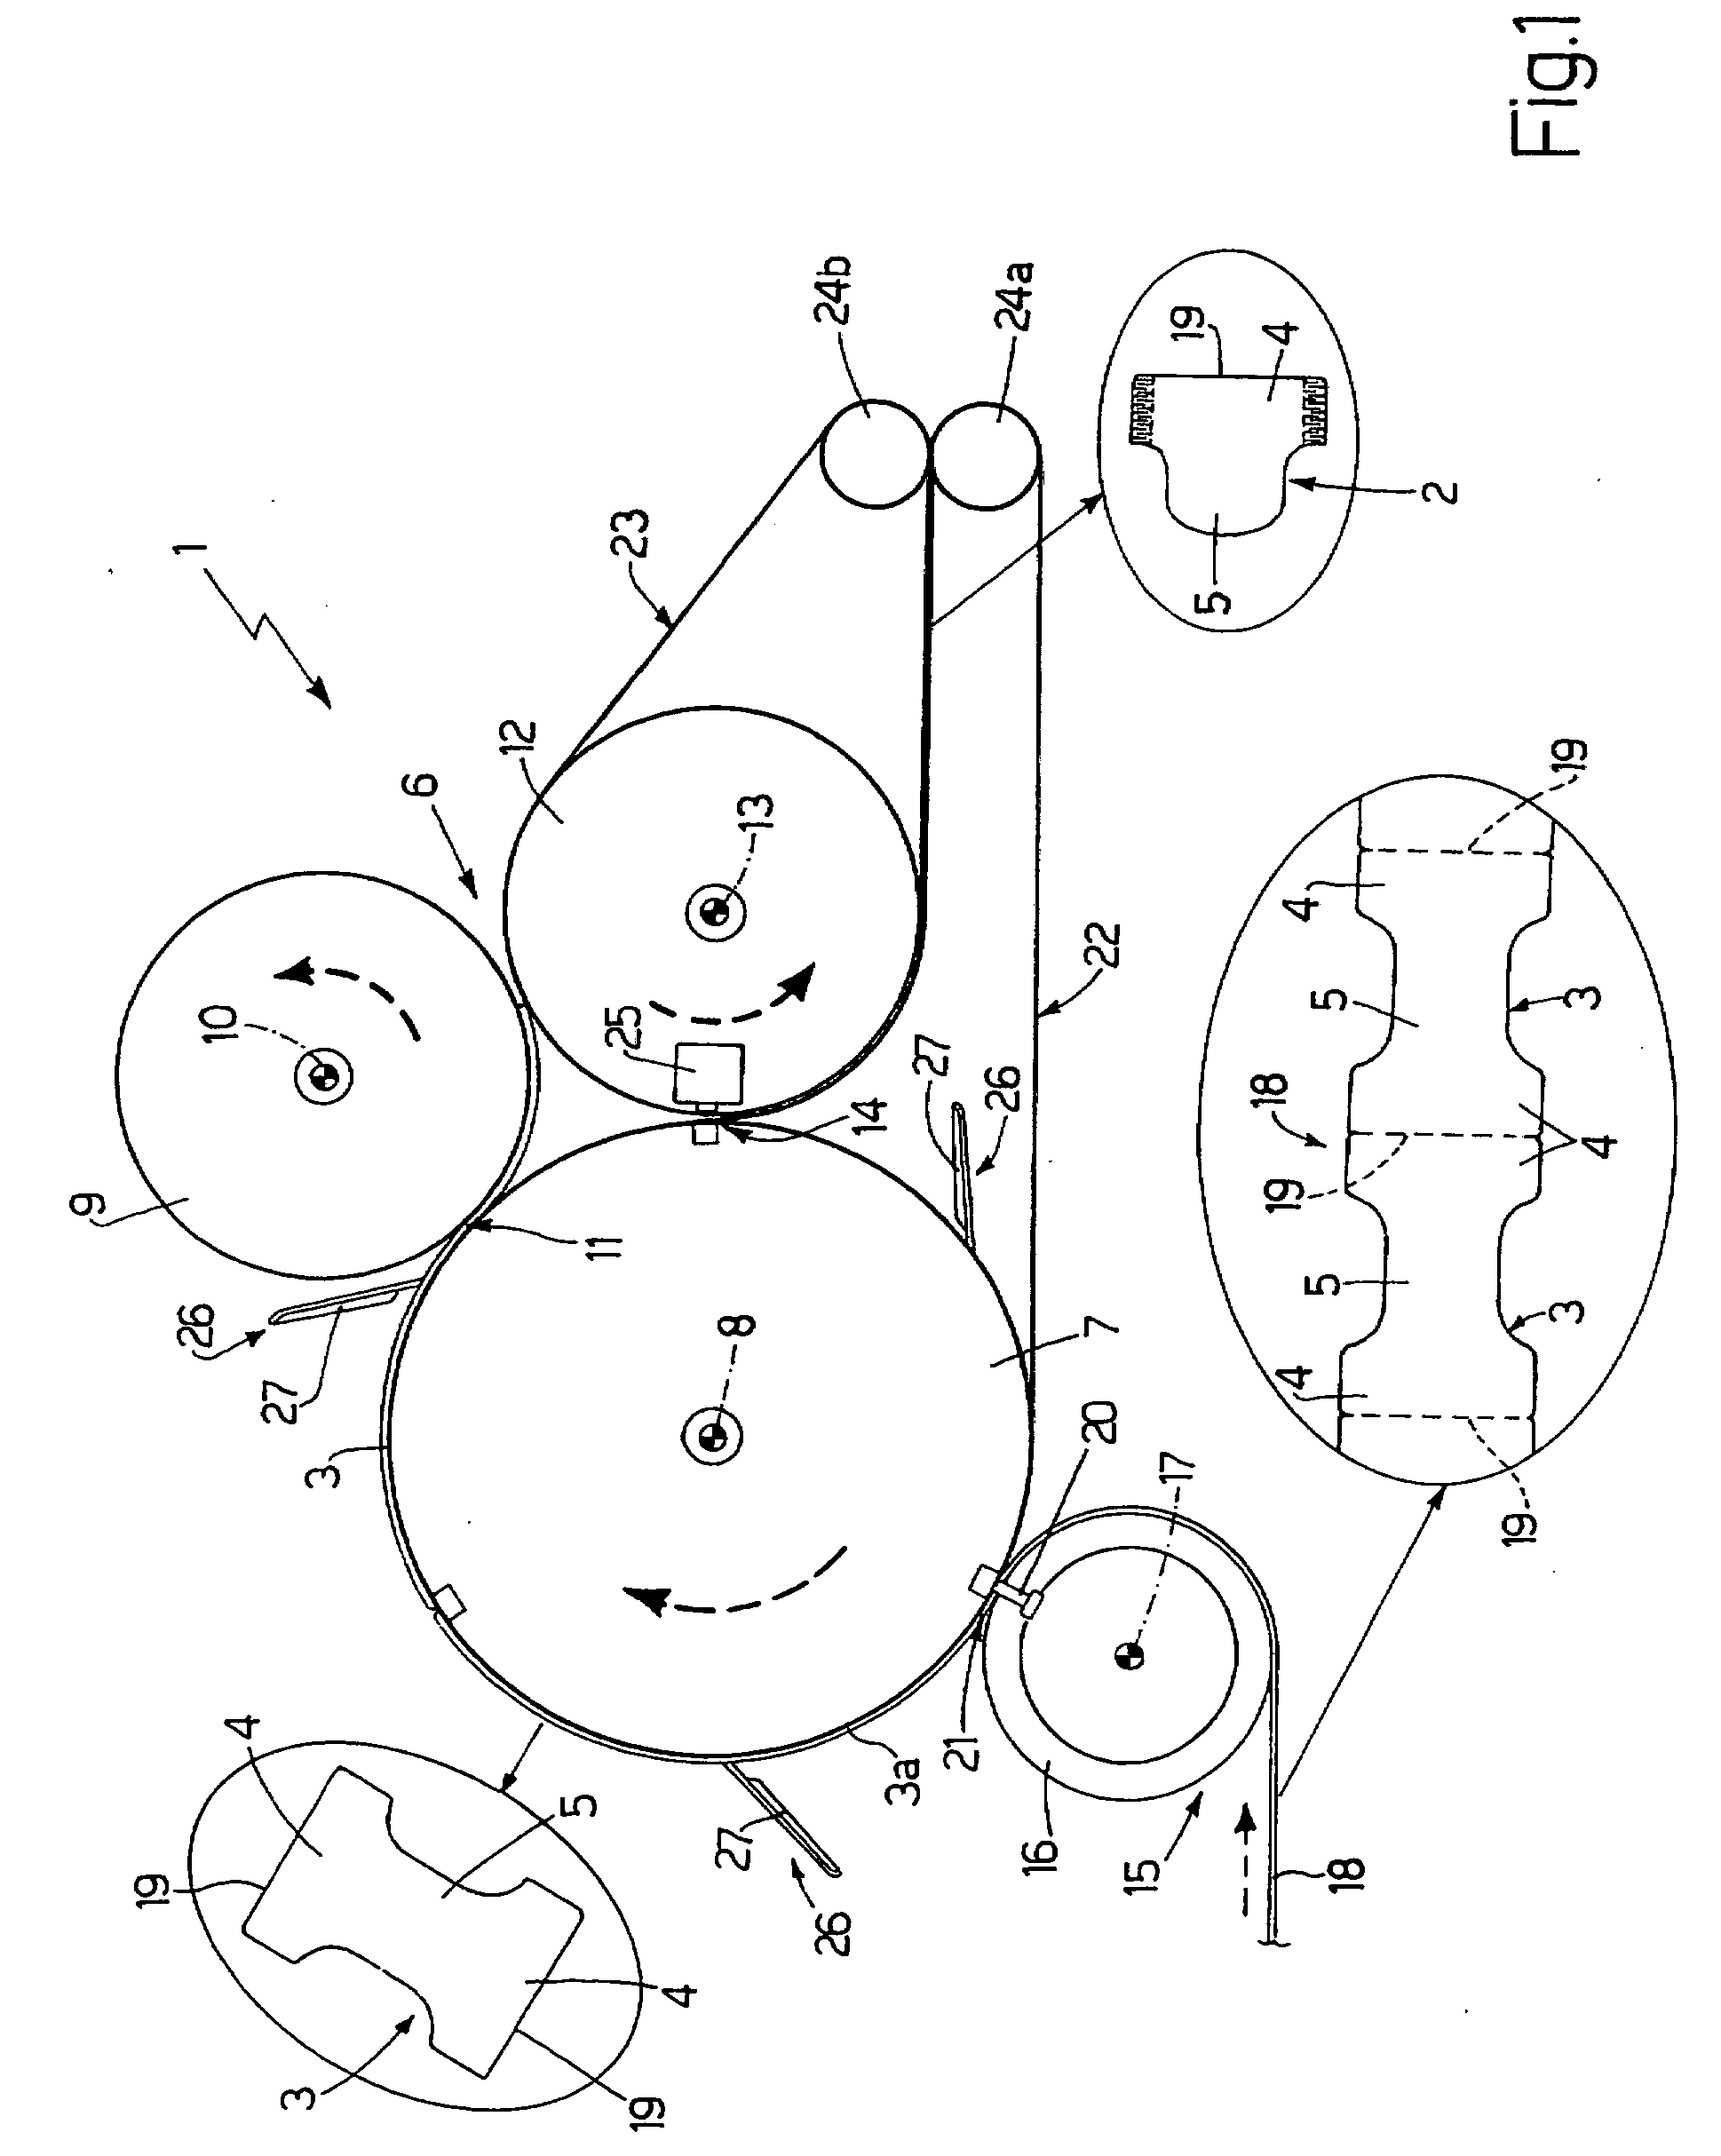 Method and machine for folding and finishing training pant diapers